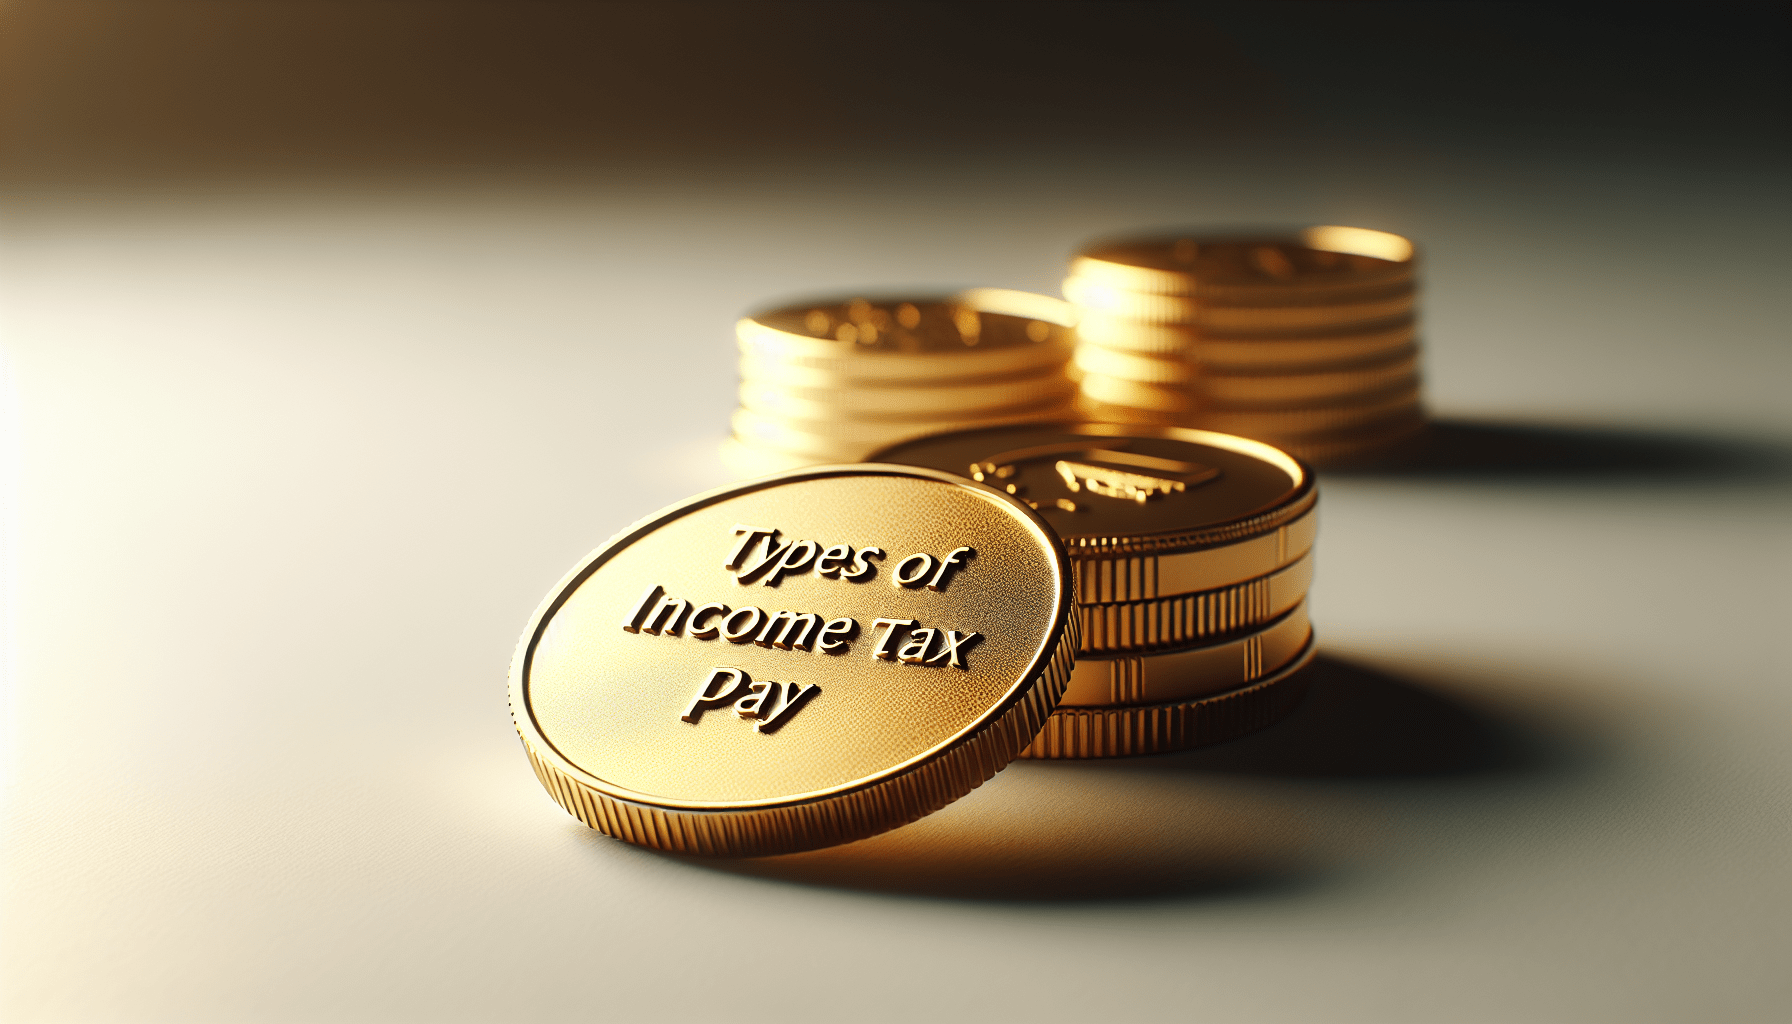 What Are Types Of Income Tax That People Pay?